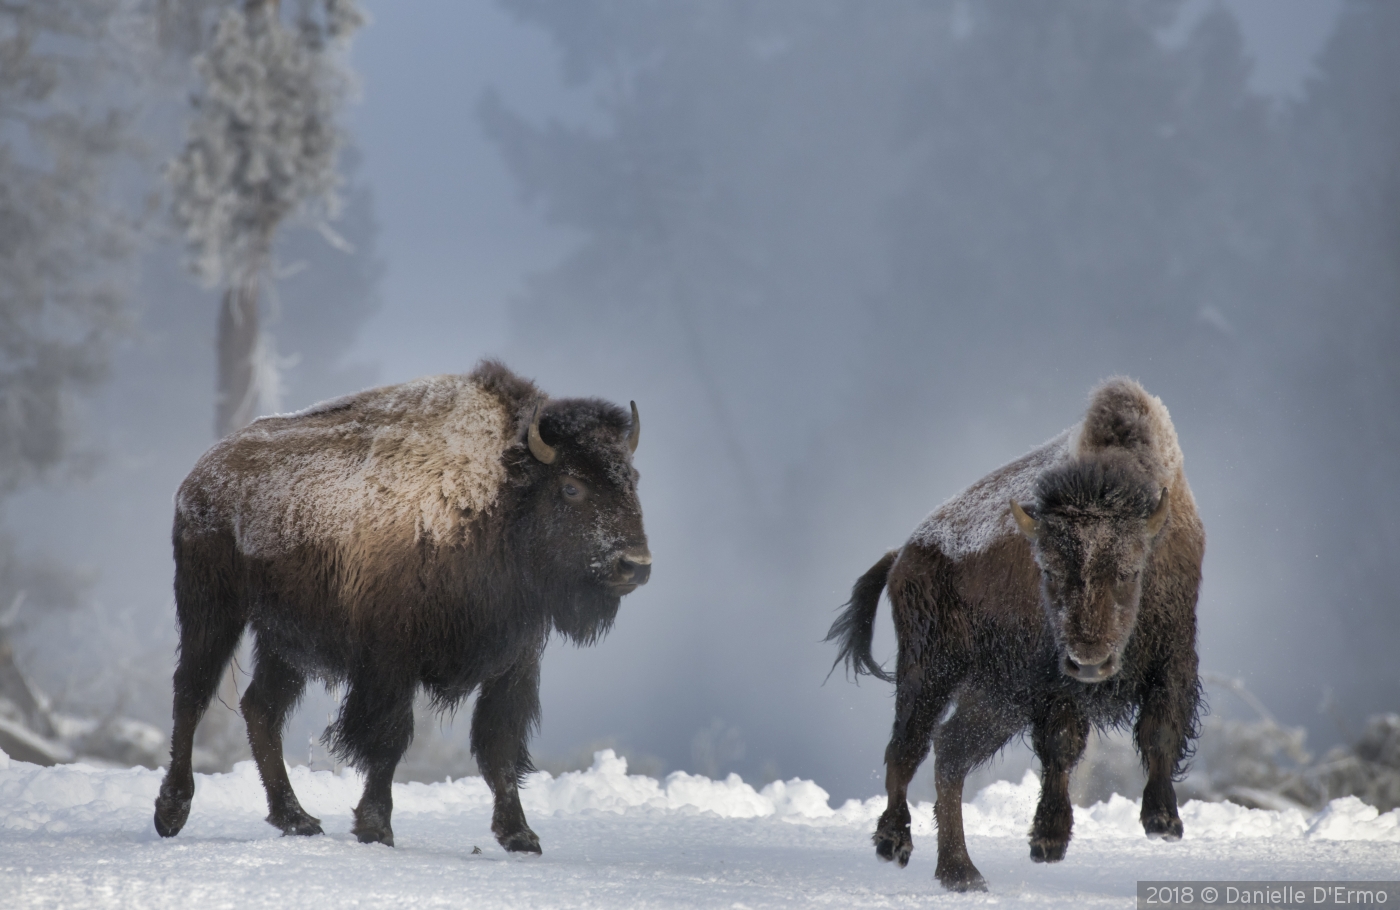 Two Bison on the The Run by Danielle D'Ermo